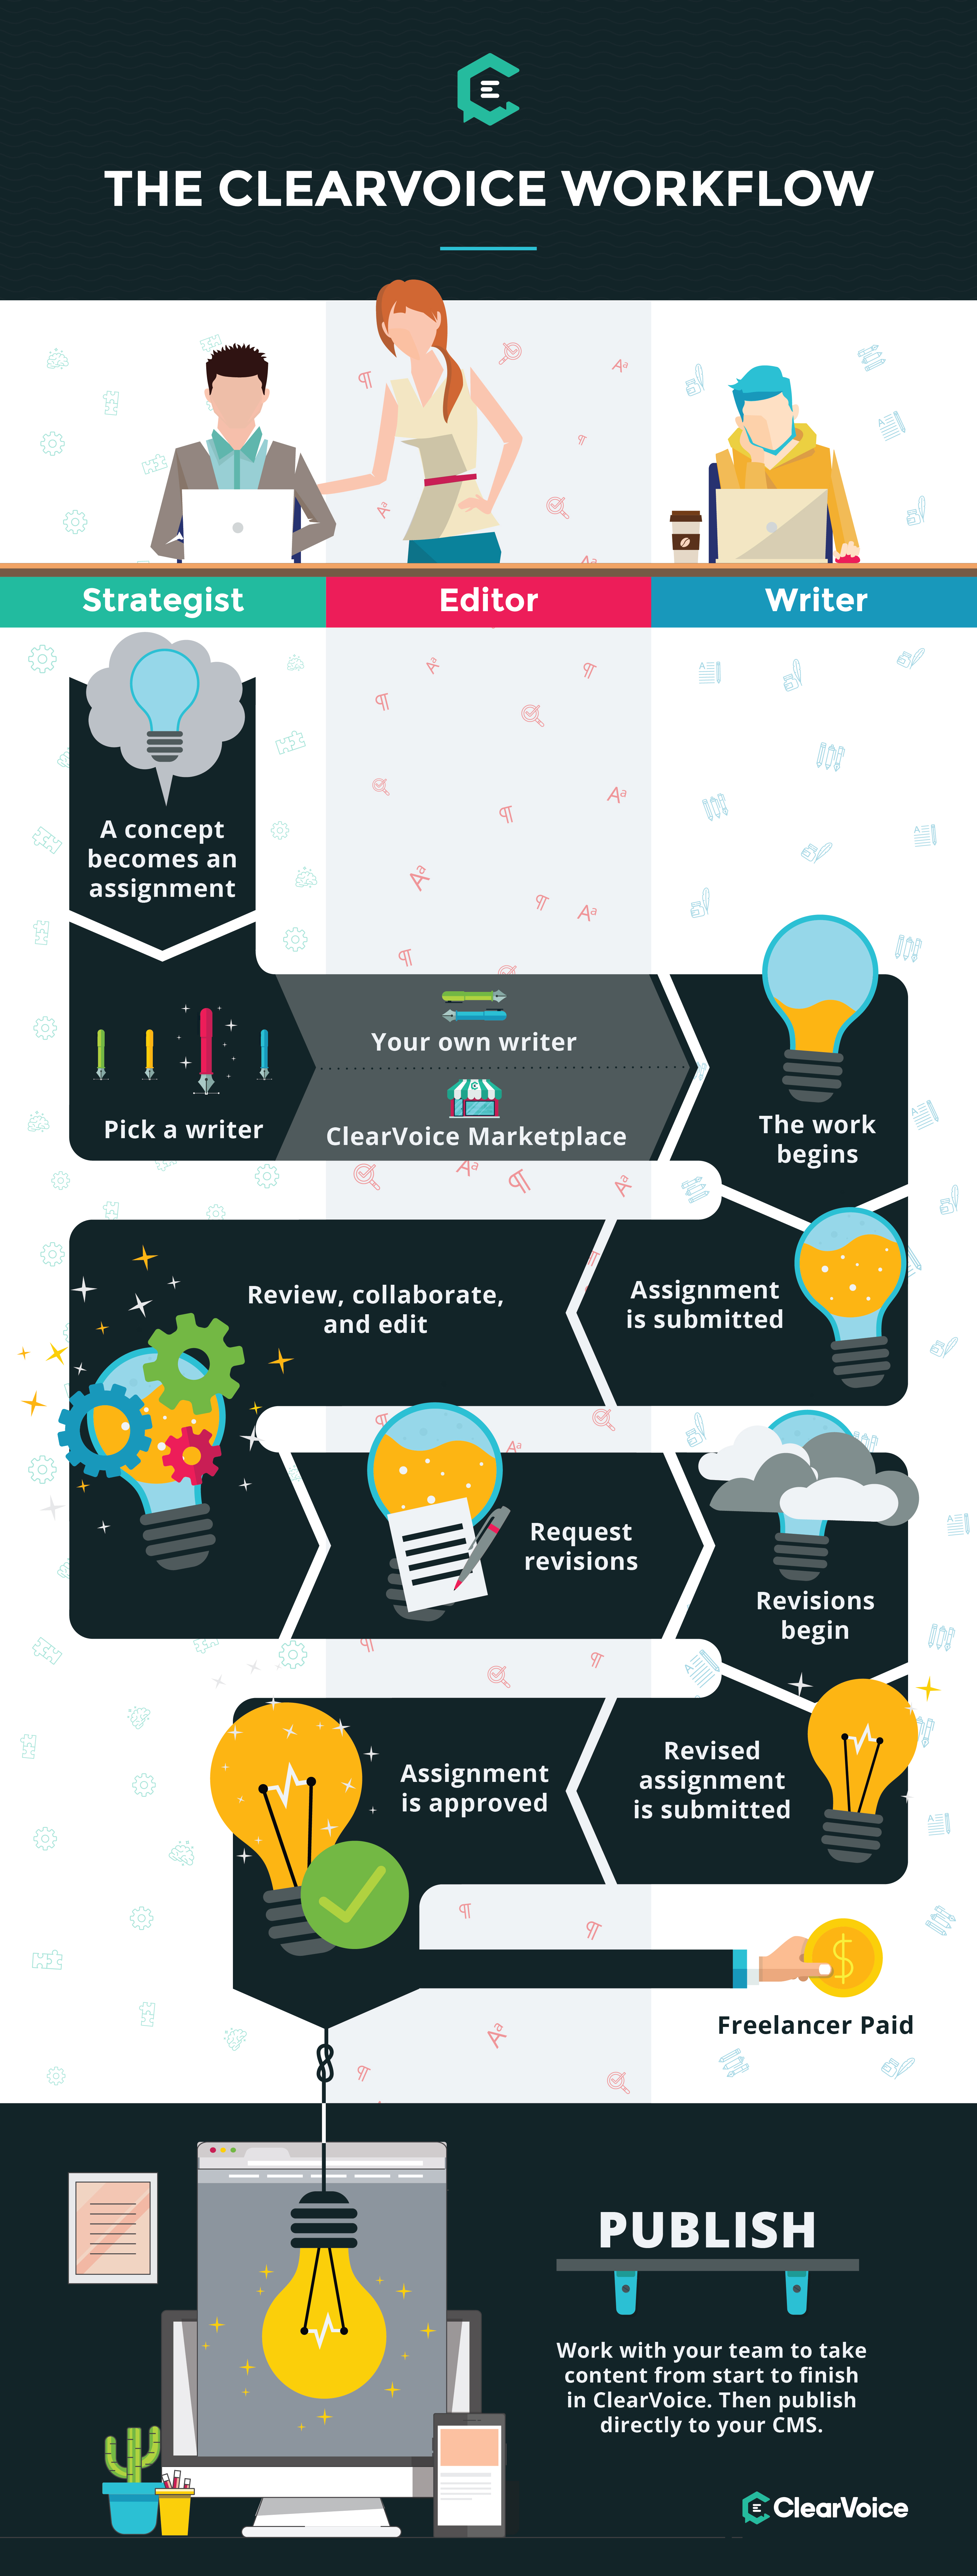 ClearVoice workflow infographic